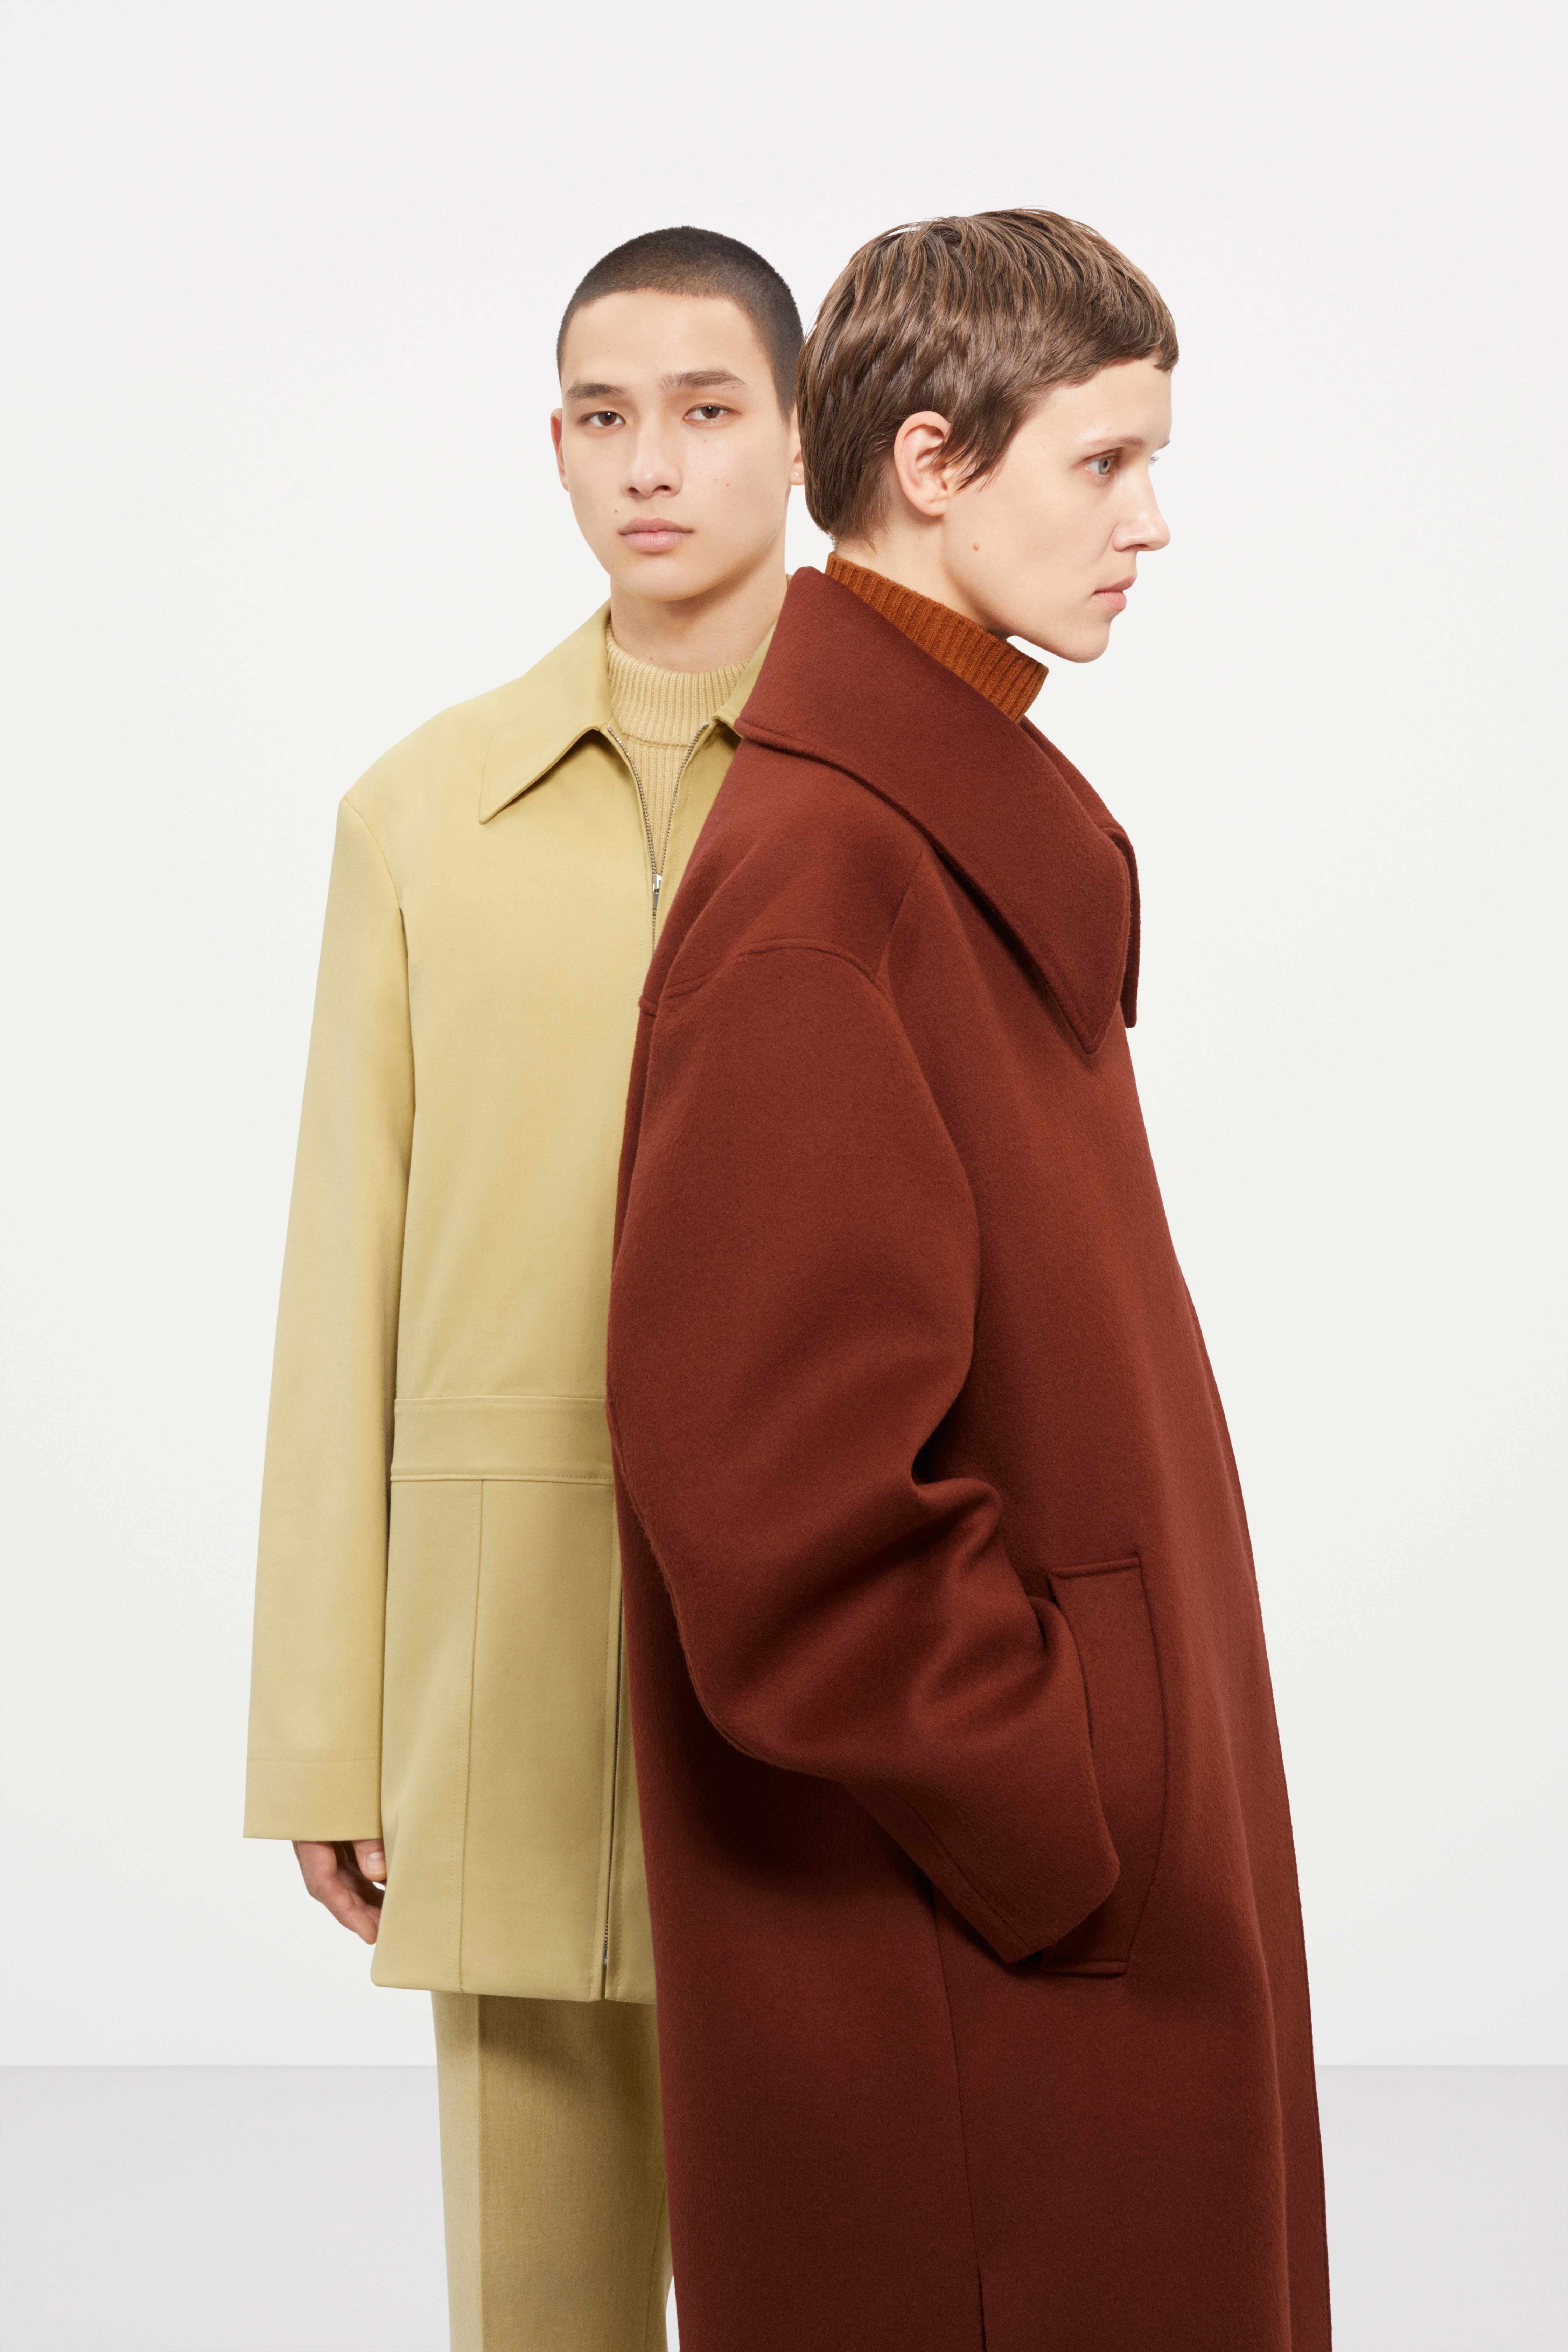 Two looks from COS. Karin Gustafsson is the creative director of COS.